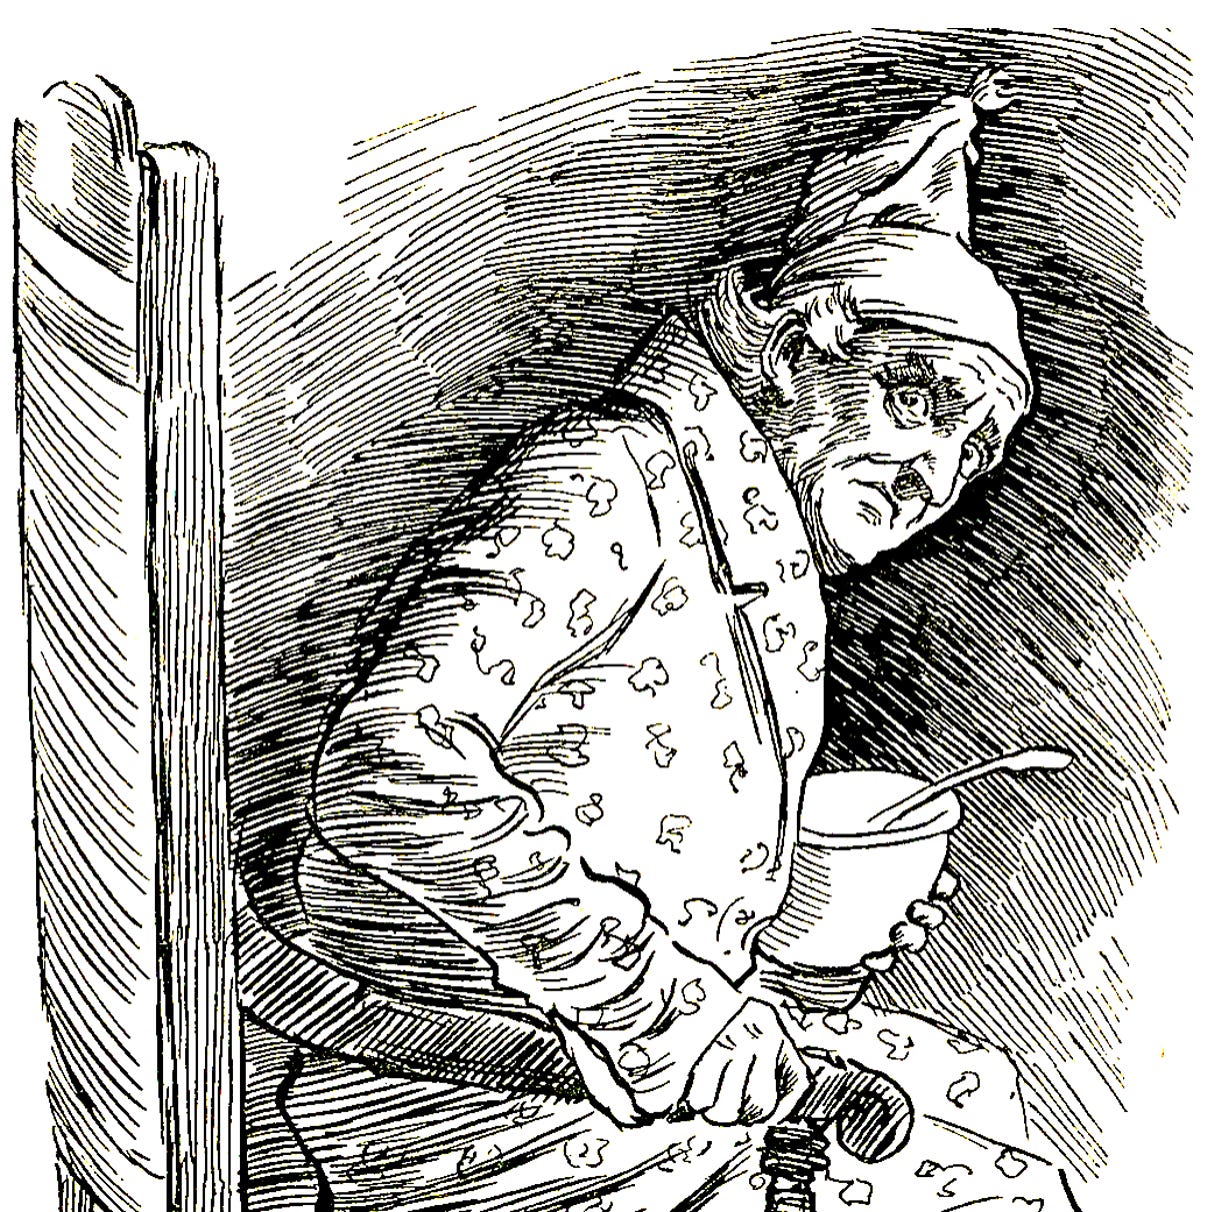 Black and white illustration of Scrooge from a Christmas Carol by Charles Dickens